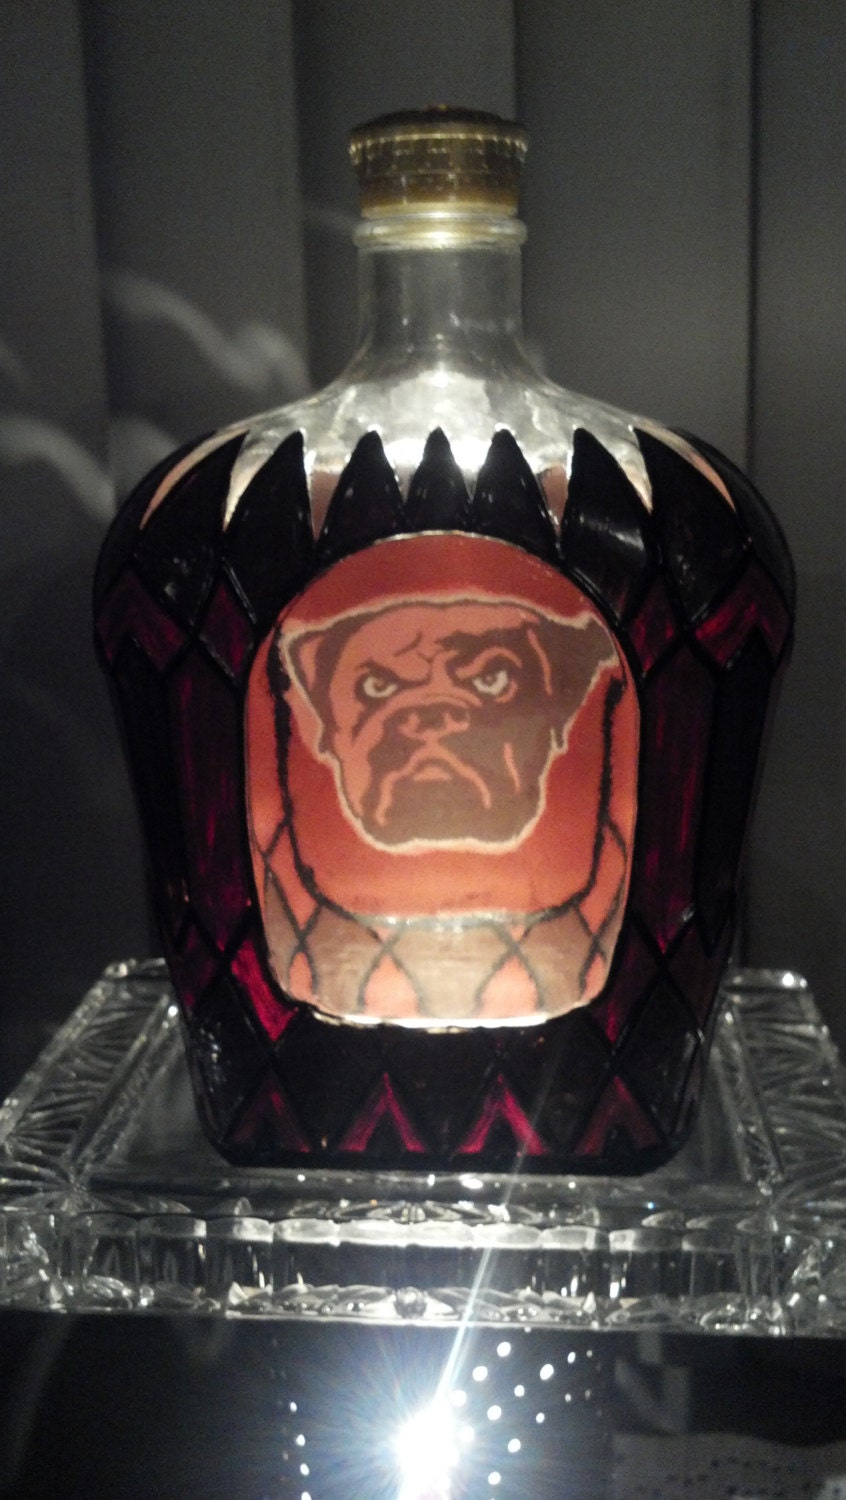 Cleveland Browns Football Crown Royal Hand Painted glass